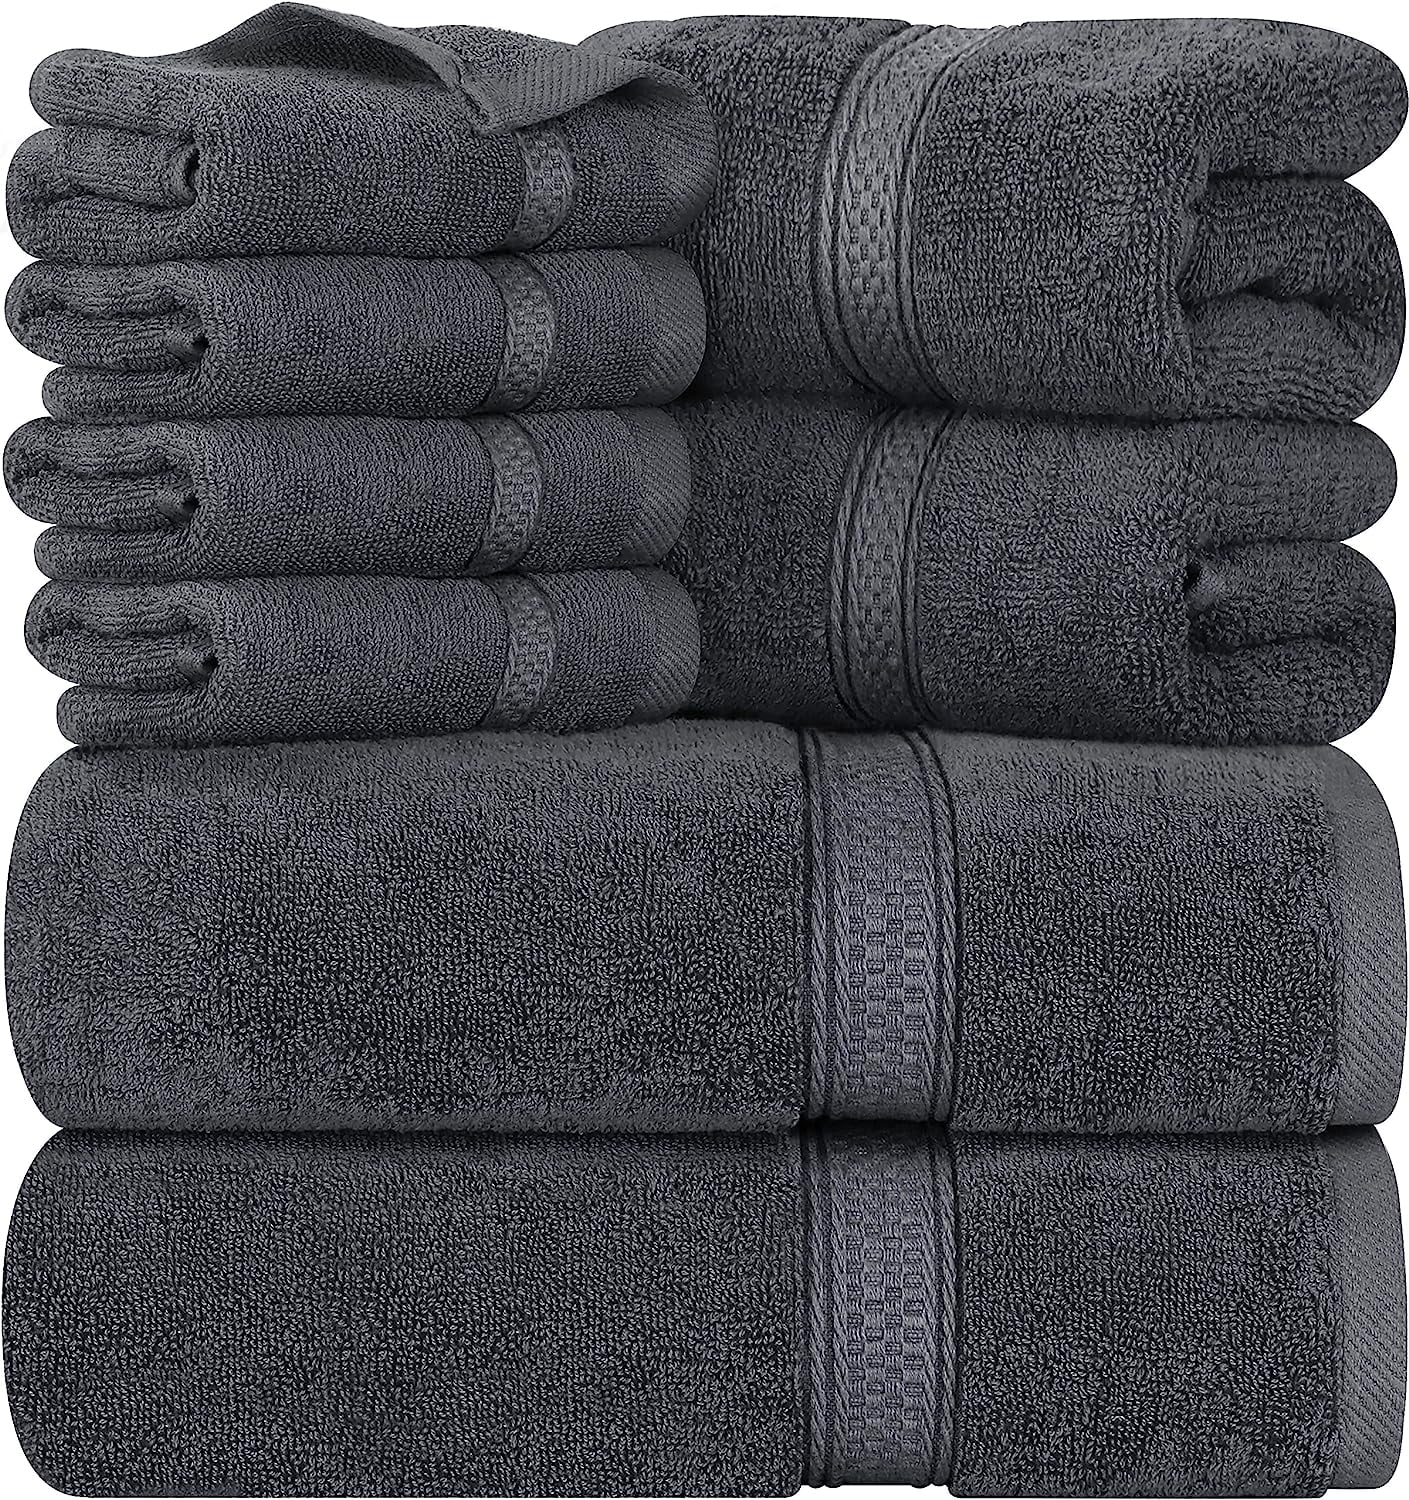 Utopia Towels 8-Piece Premium Towel Set, 2 Bath Towels, 2 Hand Towels, and  4 Wash Cloths, 600 GSM 100% Ring Spun Cotton Highly Absorbent Towels for  Bathroom, Gym, Hotel, and Spa (Grey) 